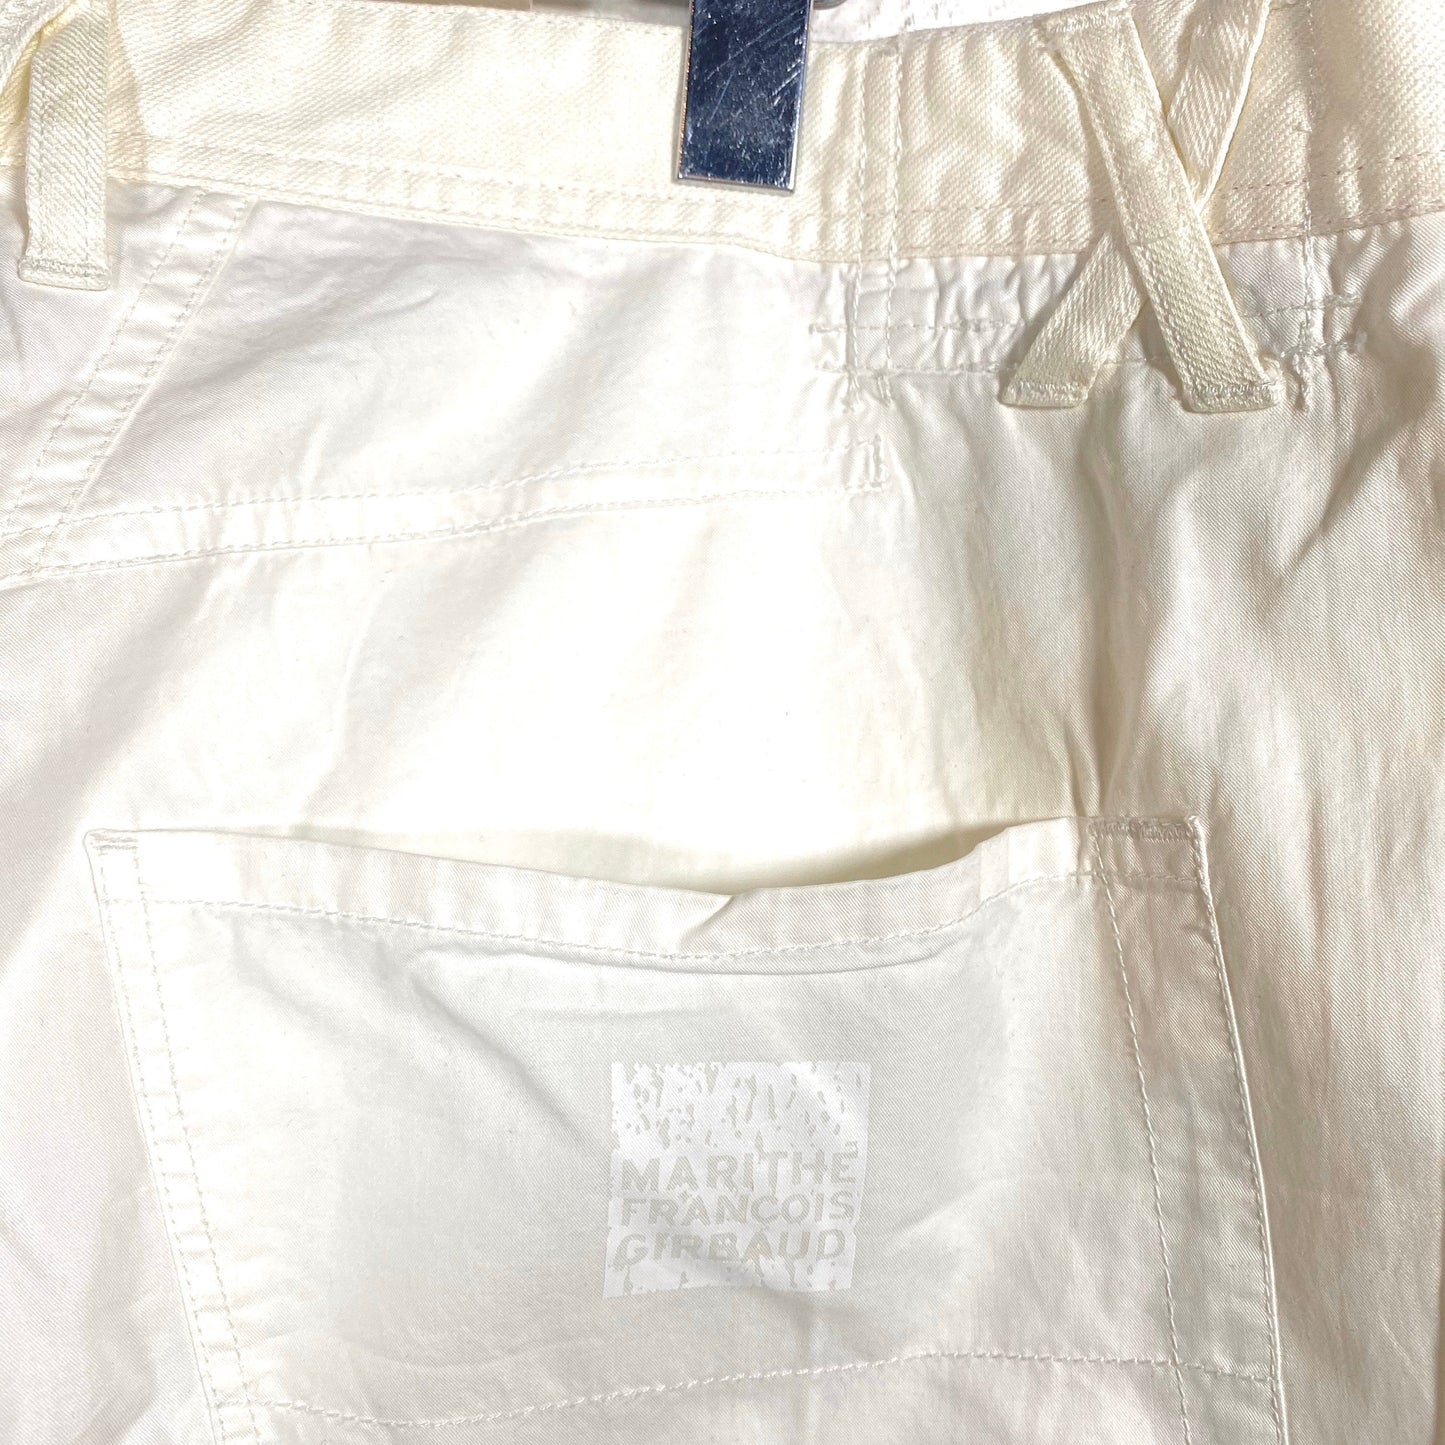 Marithe F. Girbaud 90s NWT white cotton trousers, cool pattern with denim waist and pockets and reinforced knees